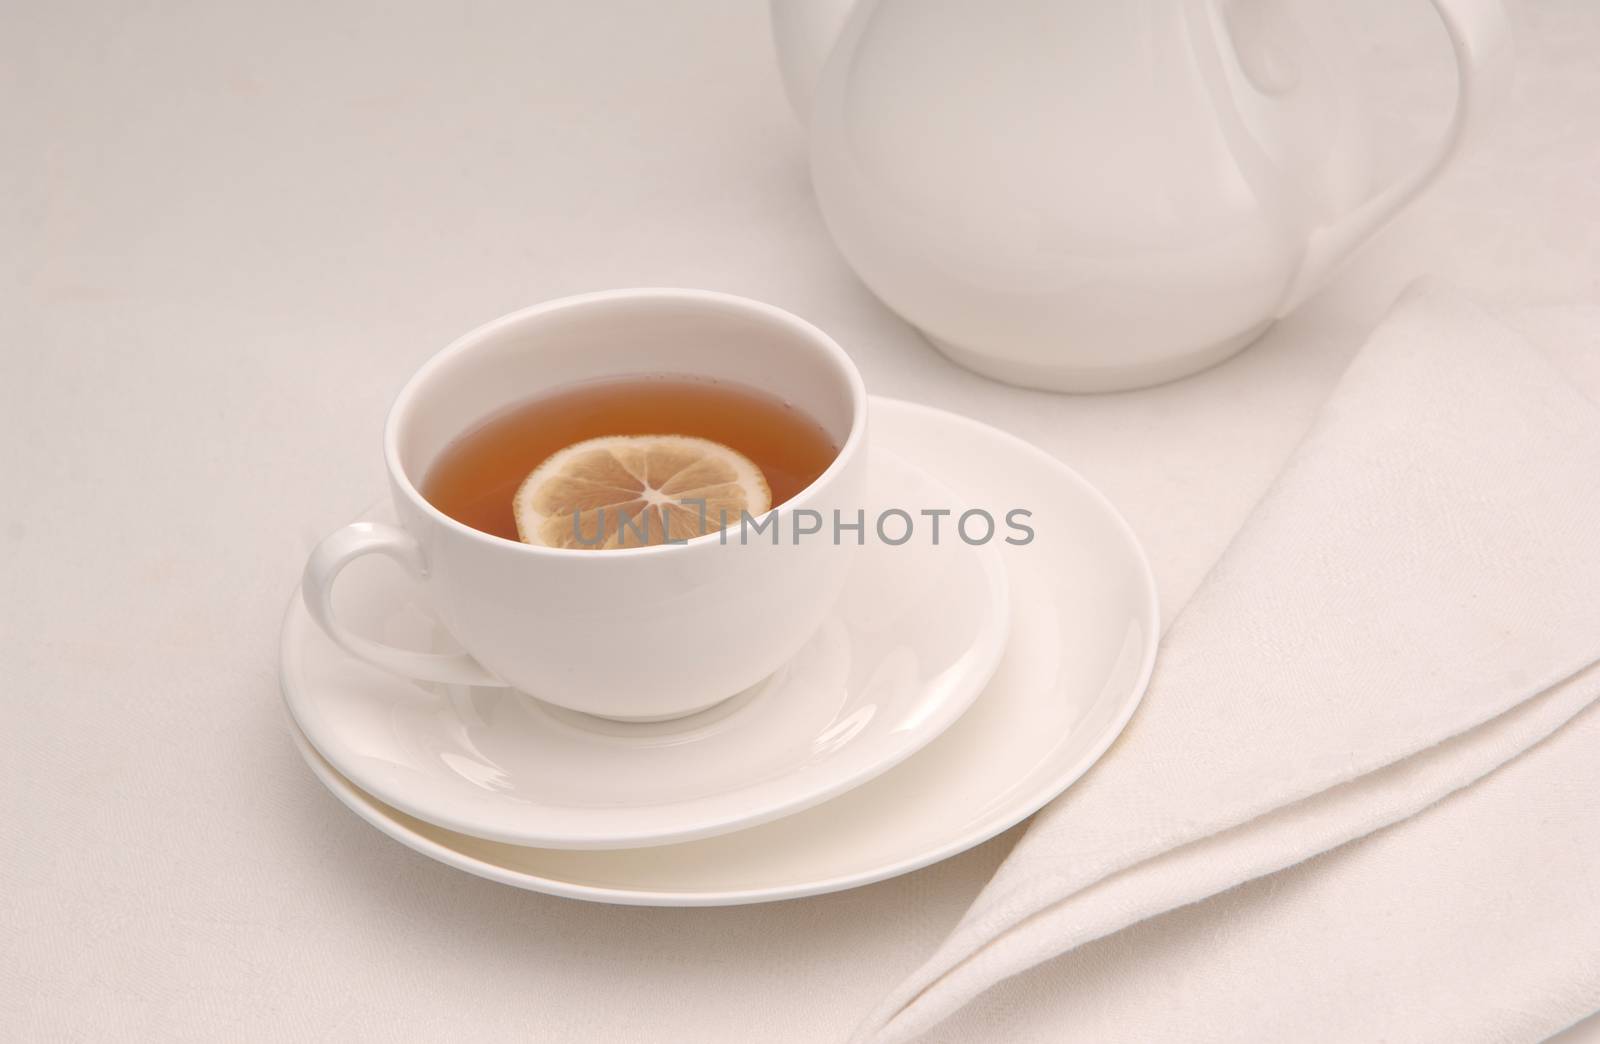 on a napkin cup of tea with lemon in a saucer and teapot